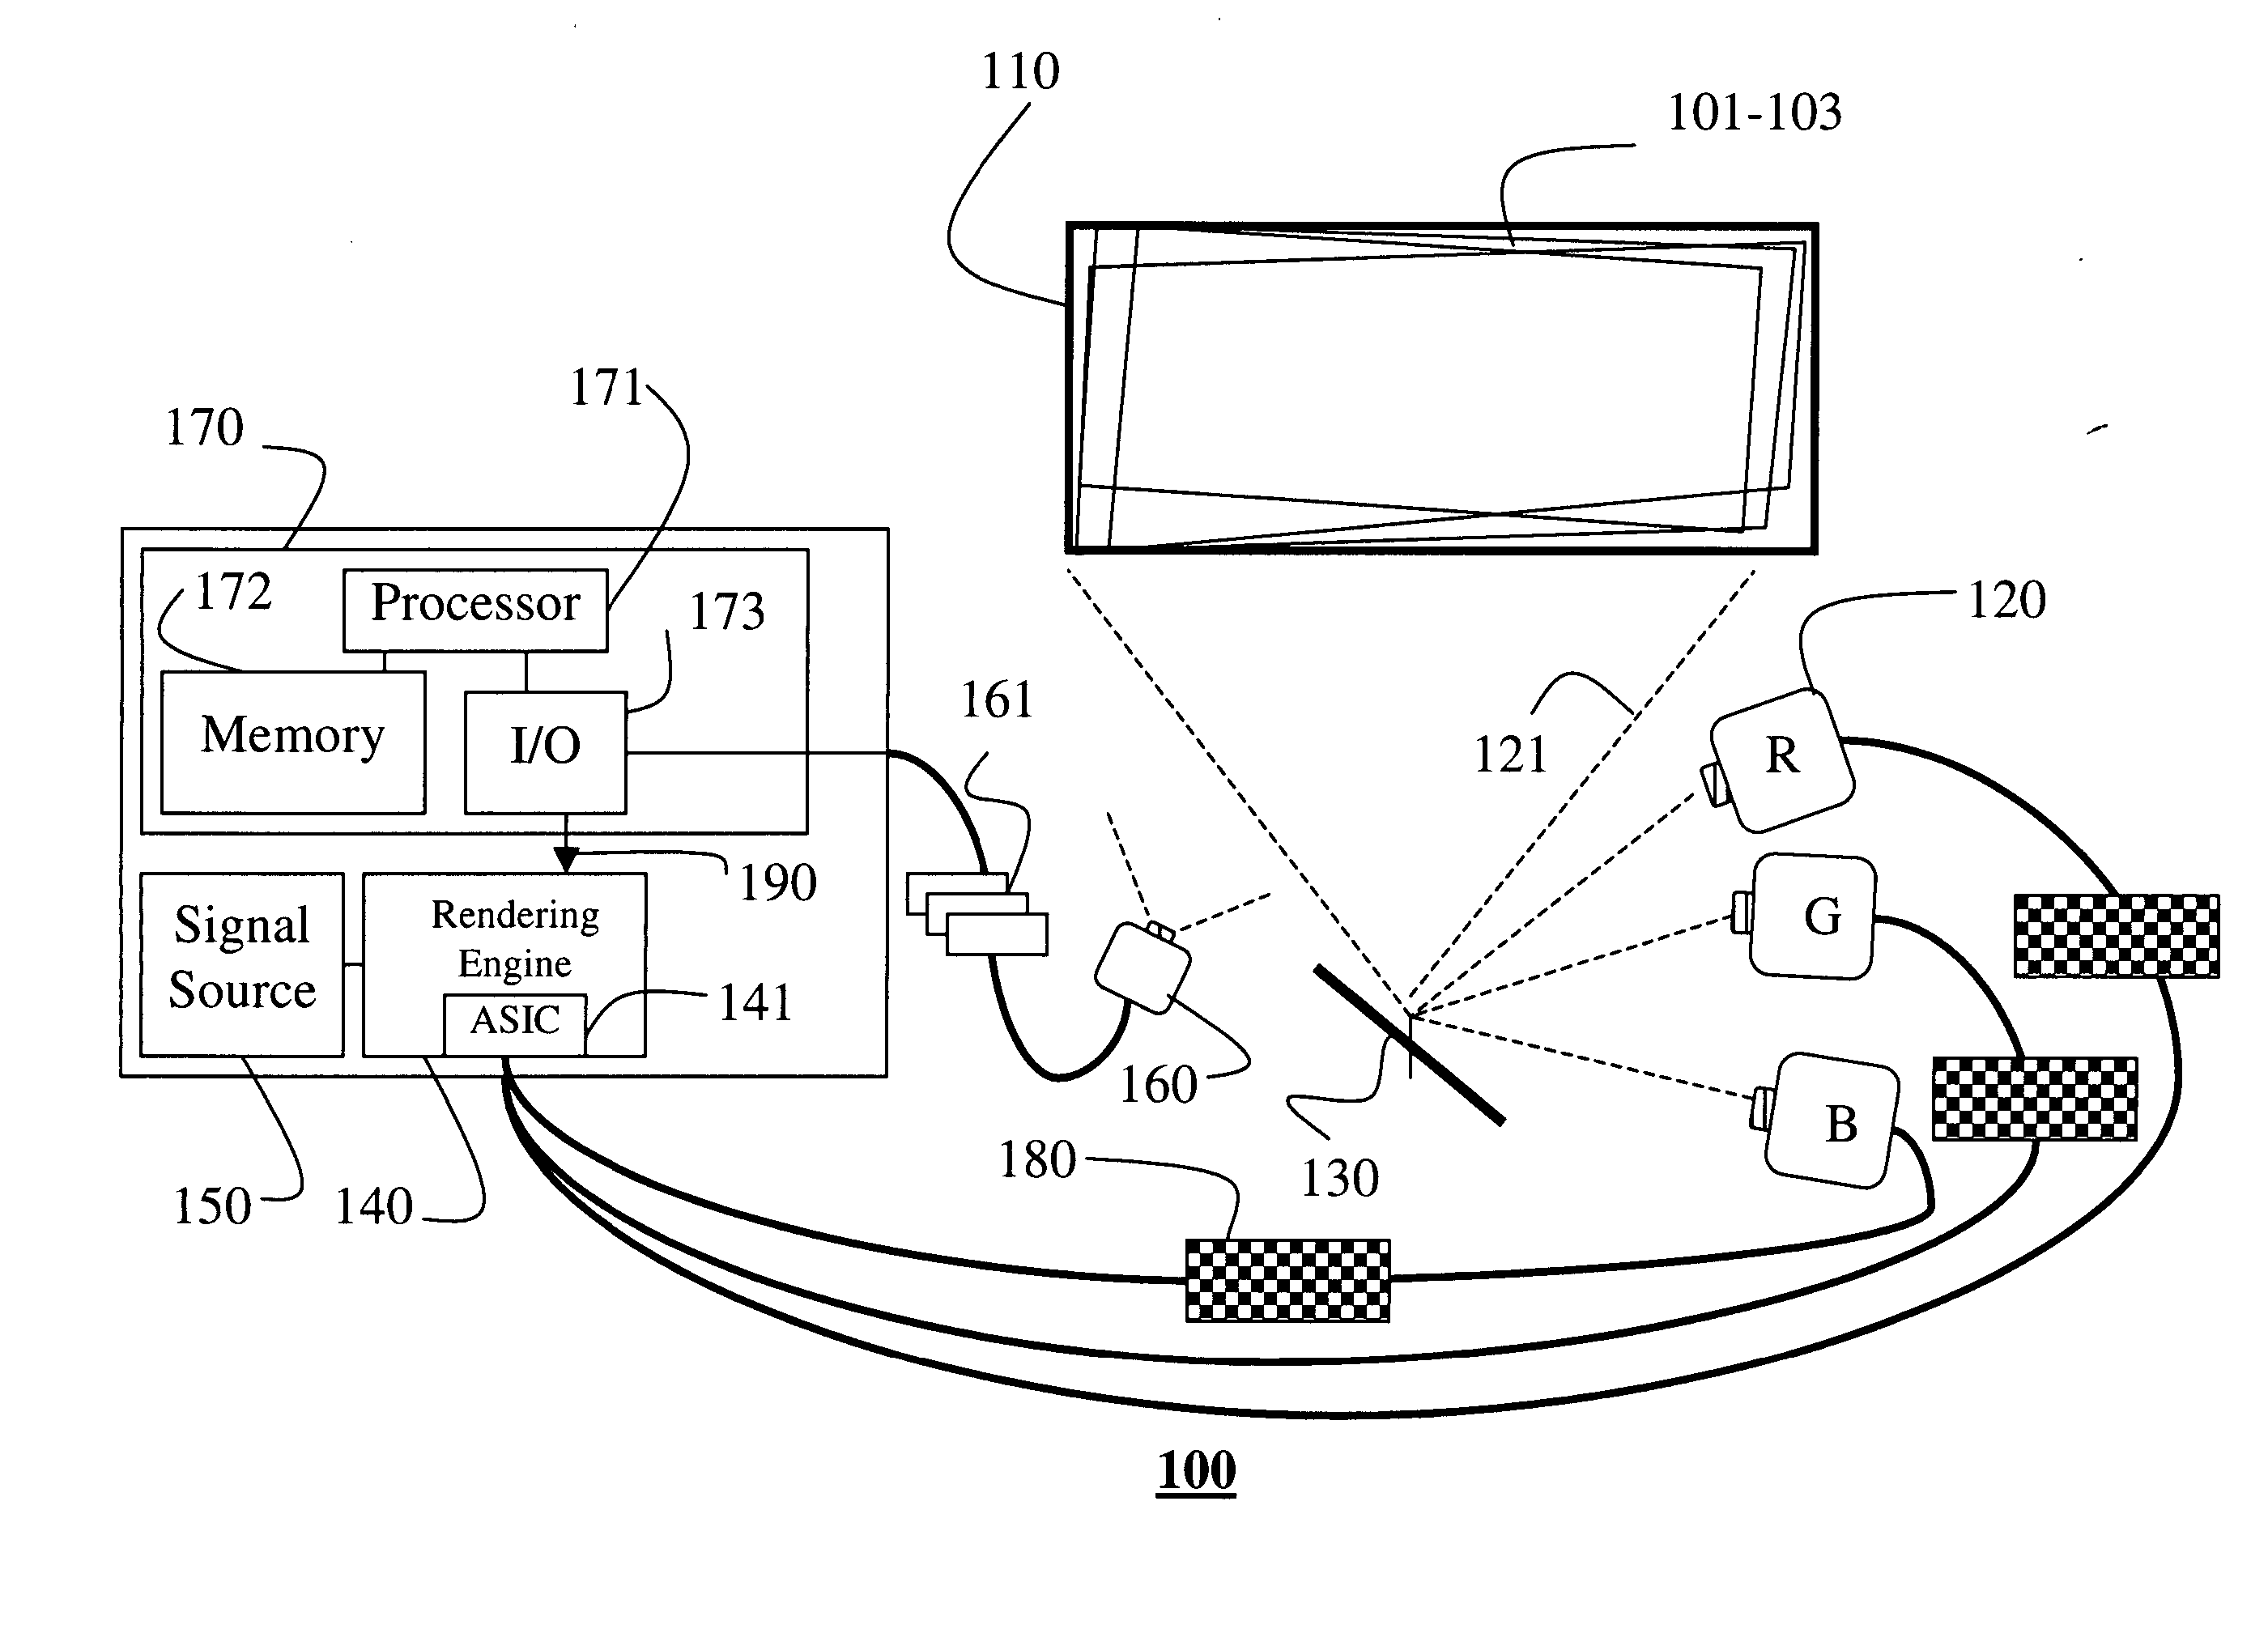 Self-correcting rear projection television